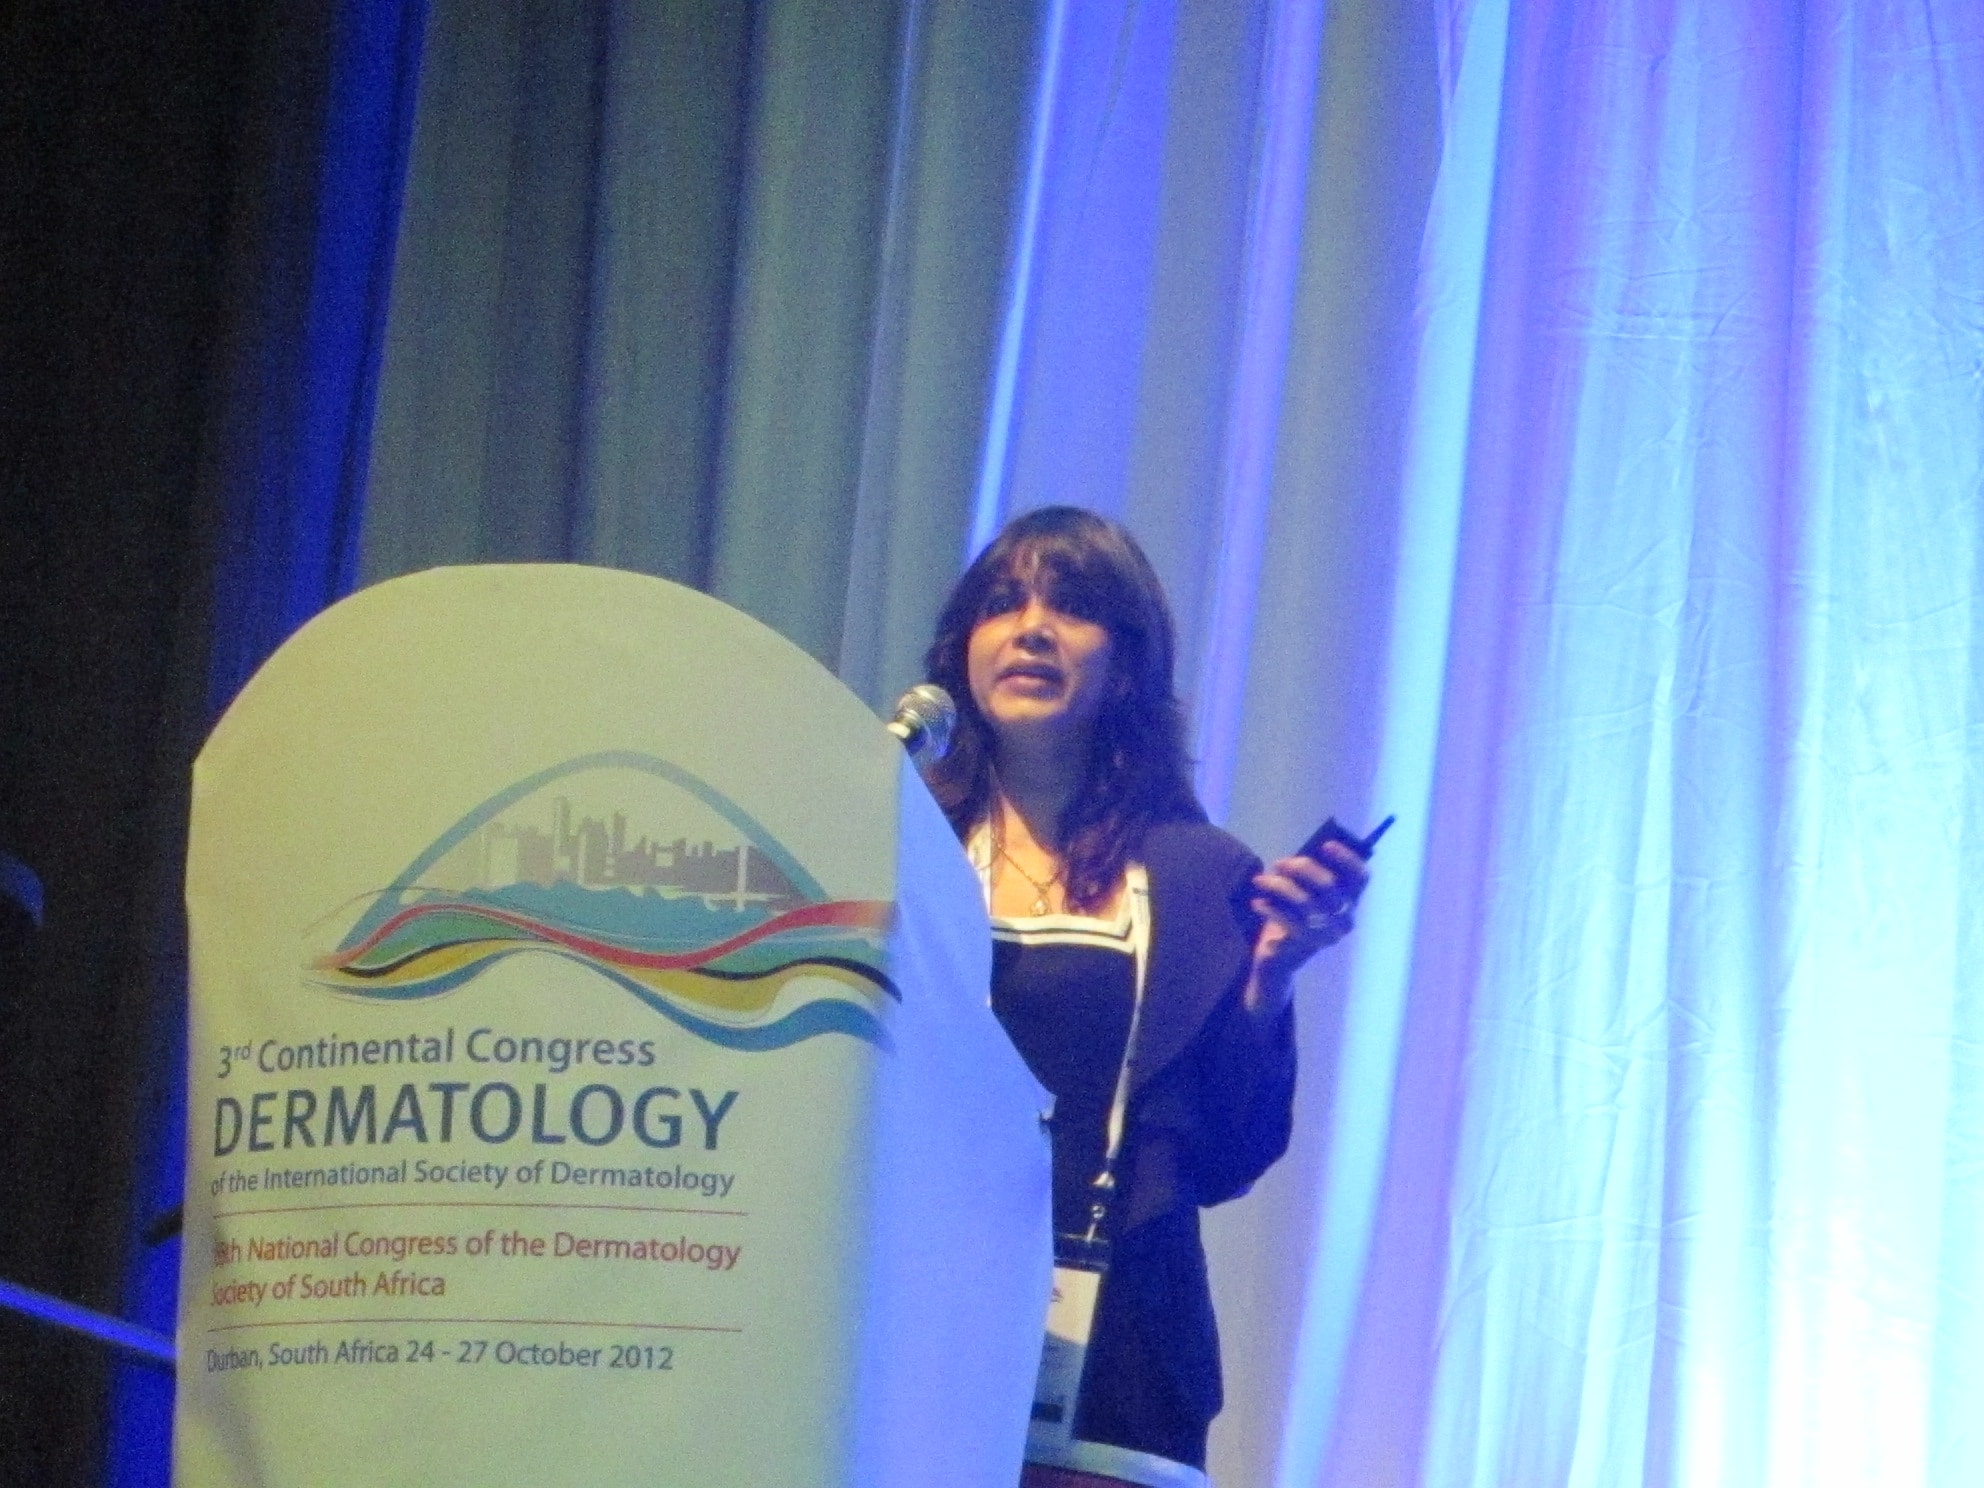 2012- 8th National Congress of the Dermatology of South Africa